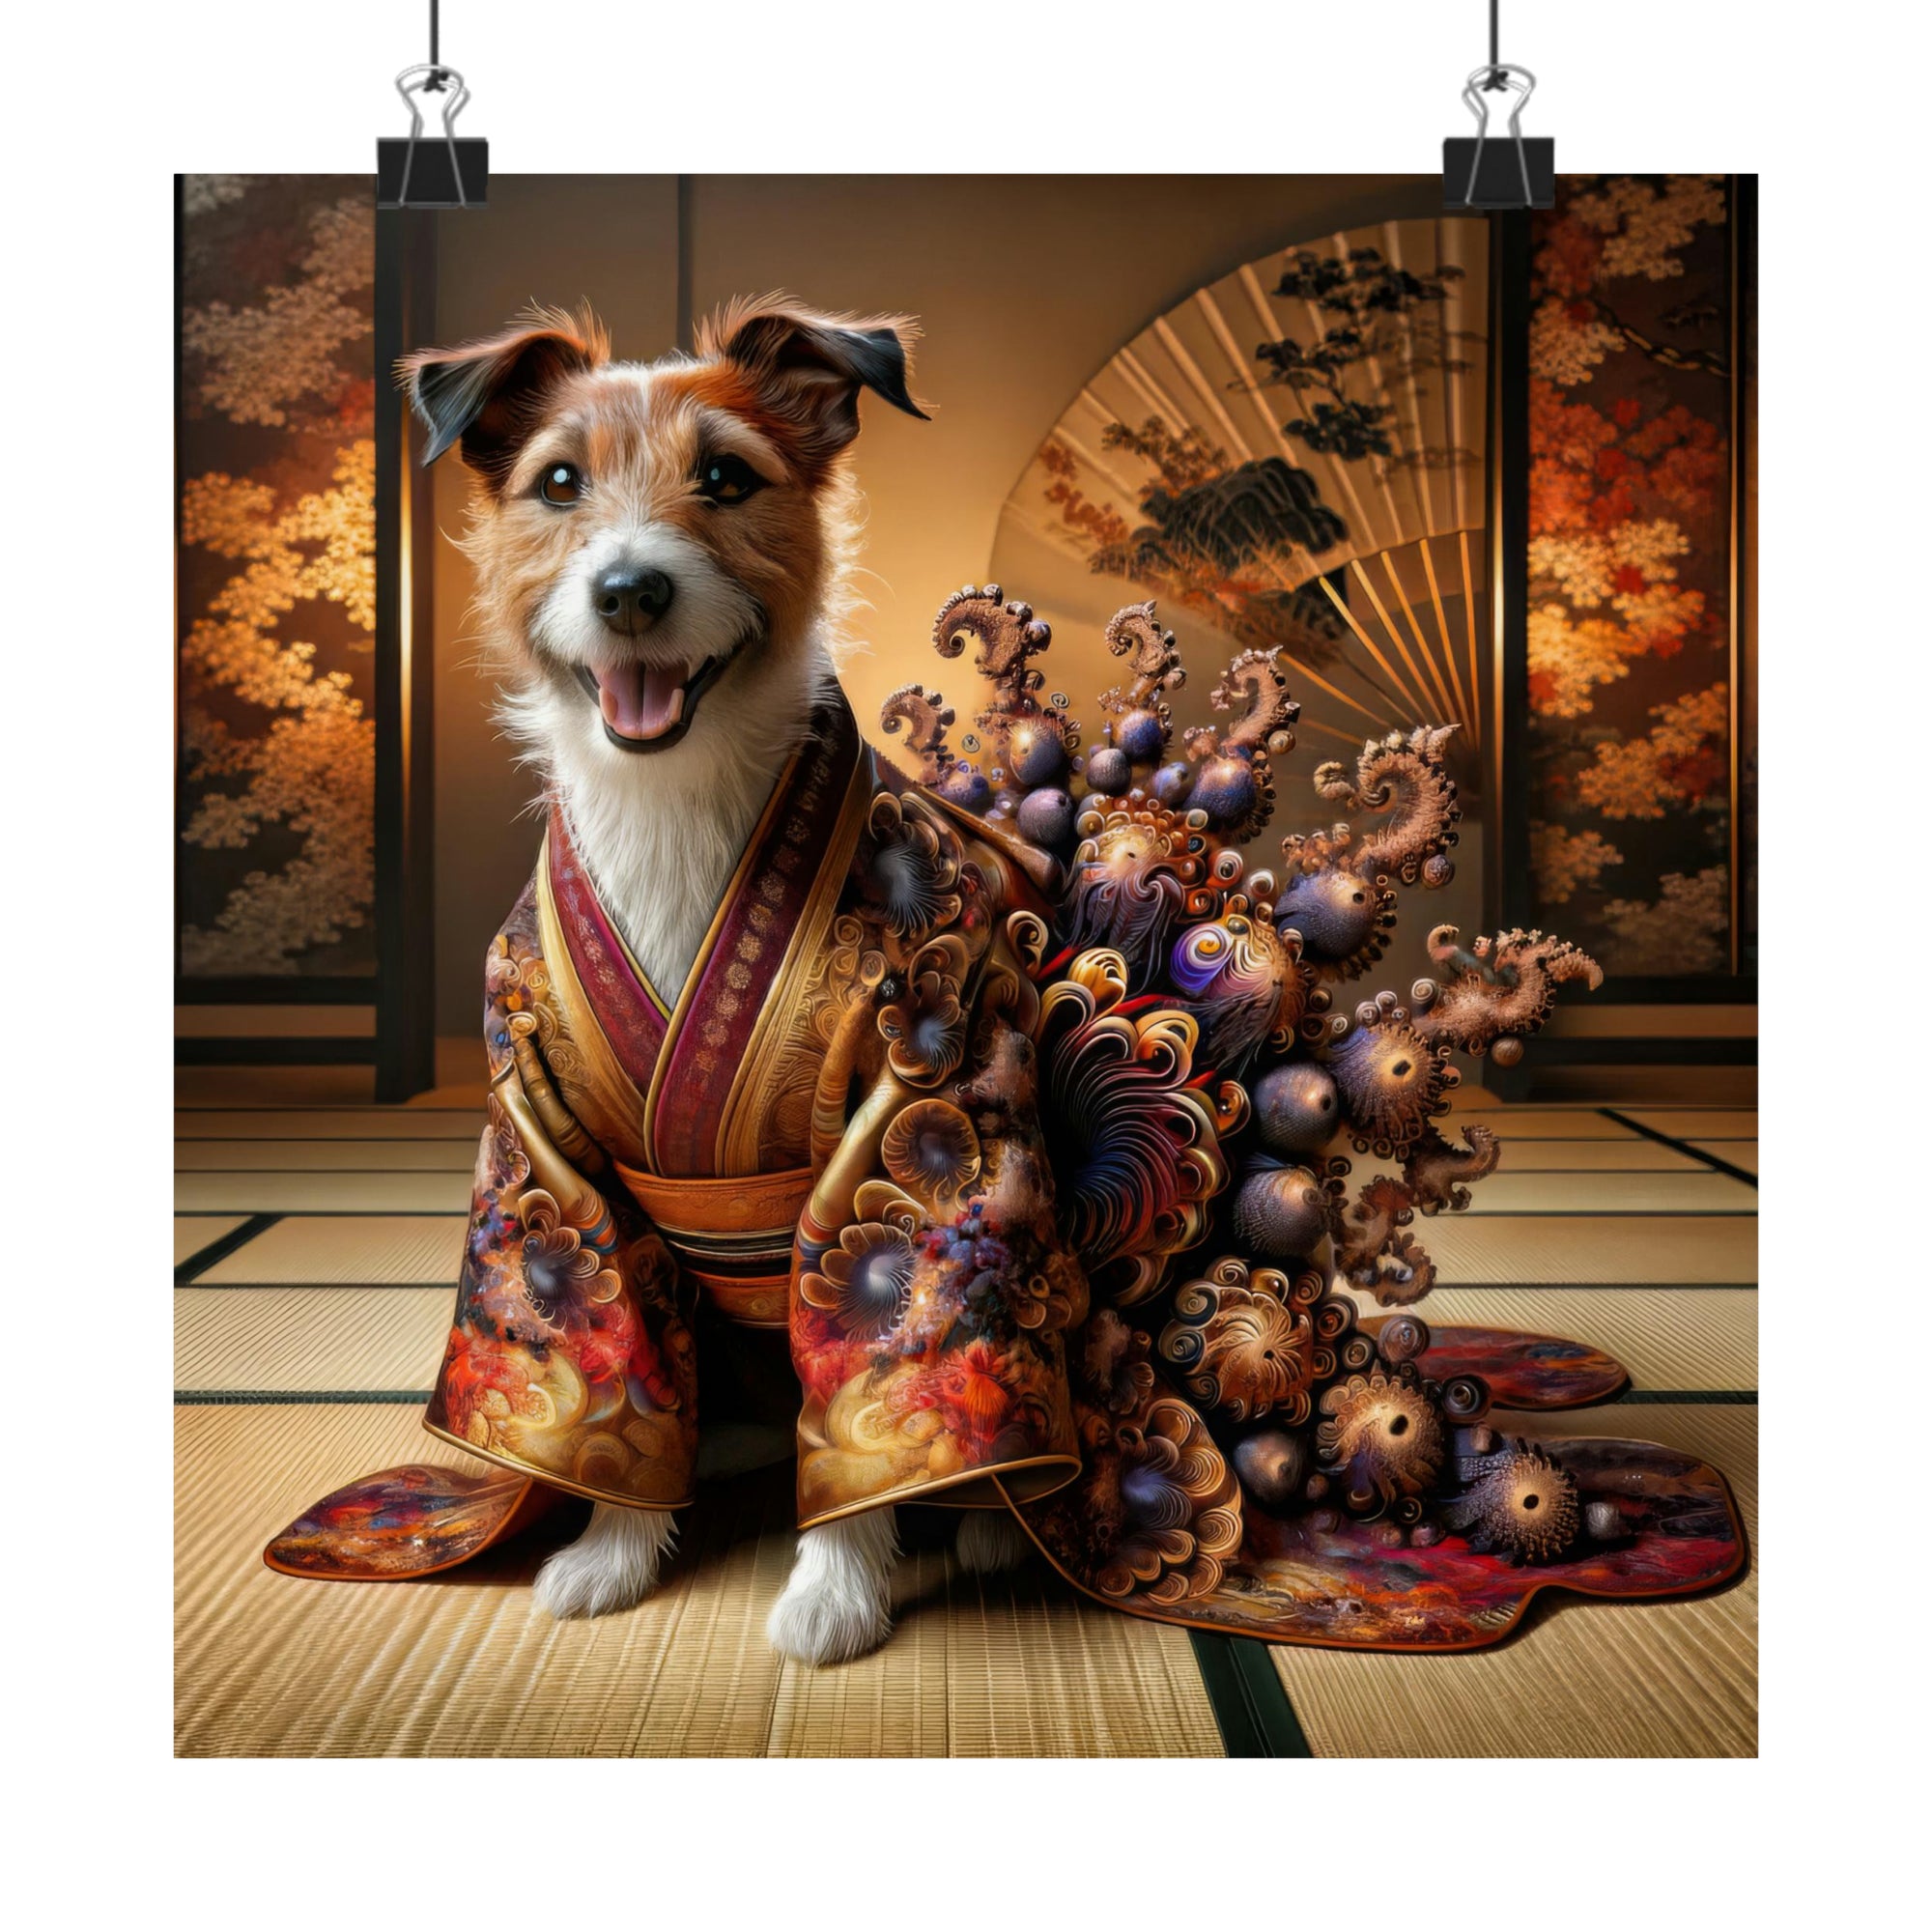 The Jack Russell’s Kimono Poster